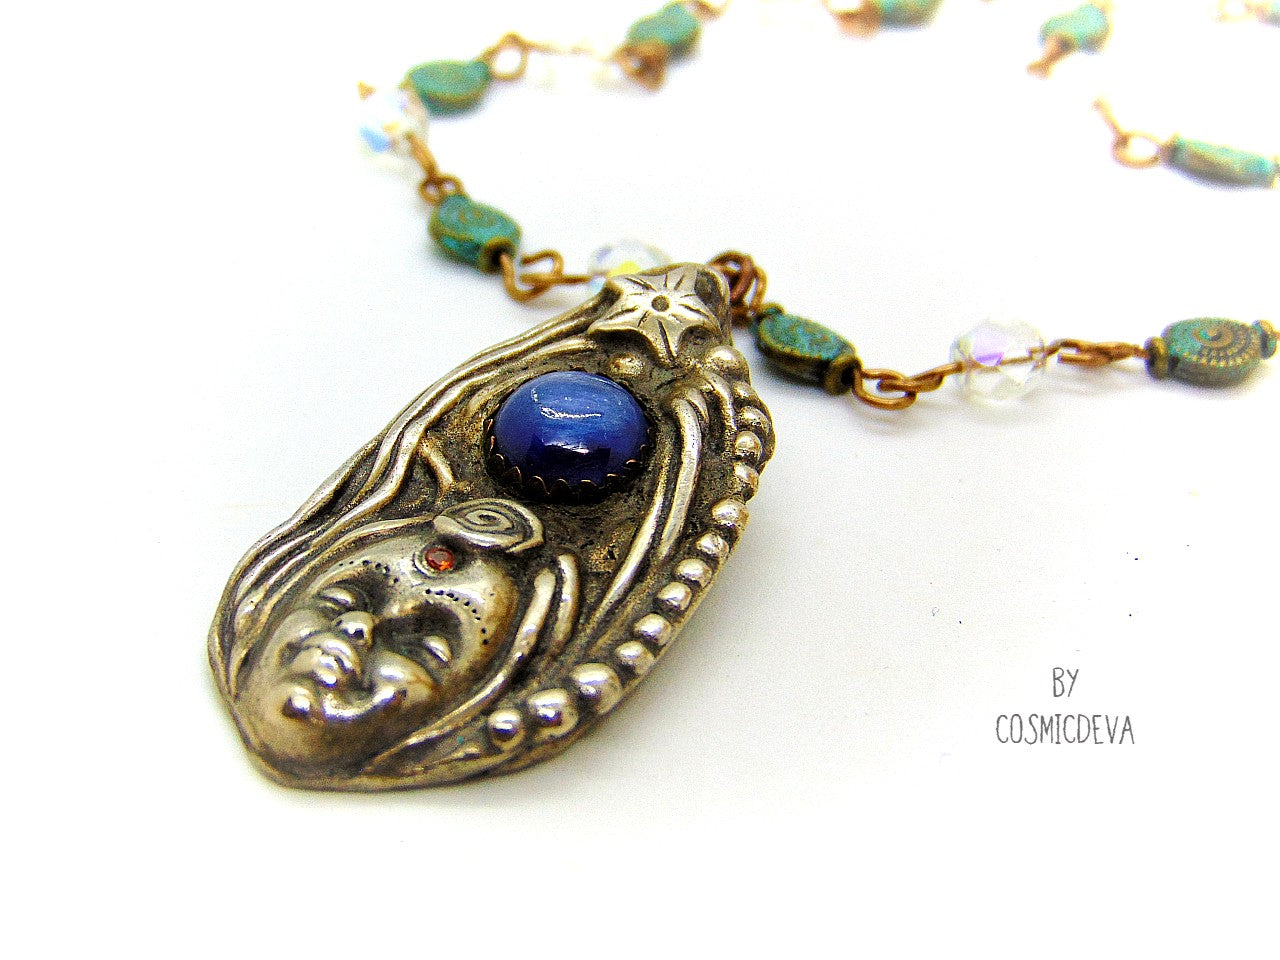 Be inspired with this unique, handmade Goddess Silver Bronze Necklace with a Blue Kyanite gemstone. Its one-of-a-kind design will bring beauty and enchantment to your life! A tiny fire opal adorns the goddess' third eye for an added spark of color and power. Crafted with love, it will be your cherished companion for many years.